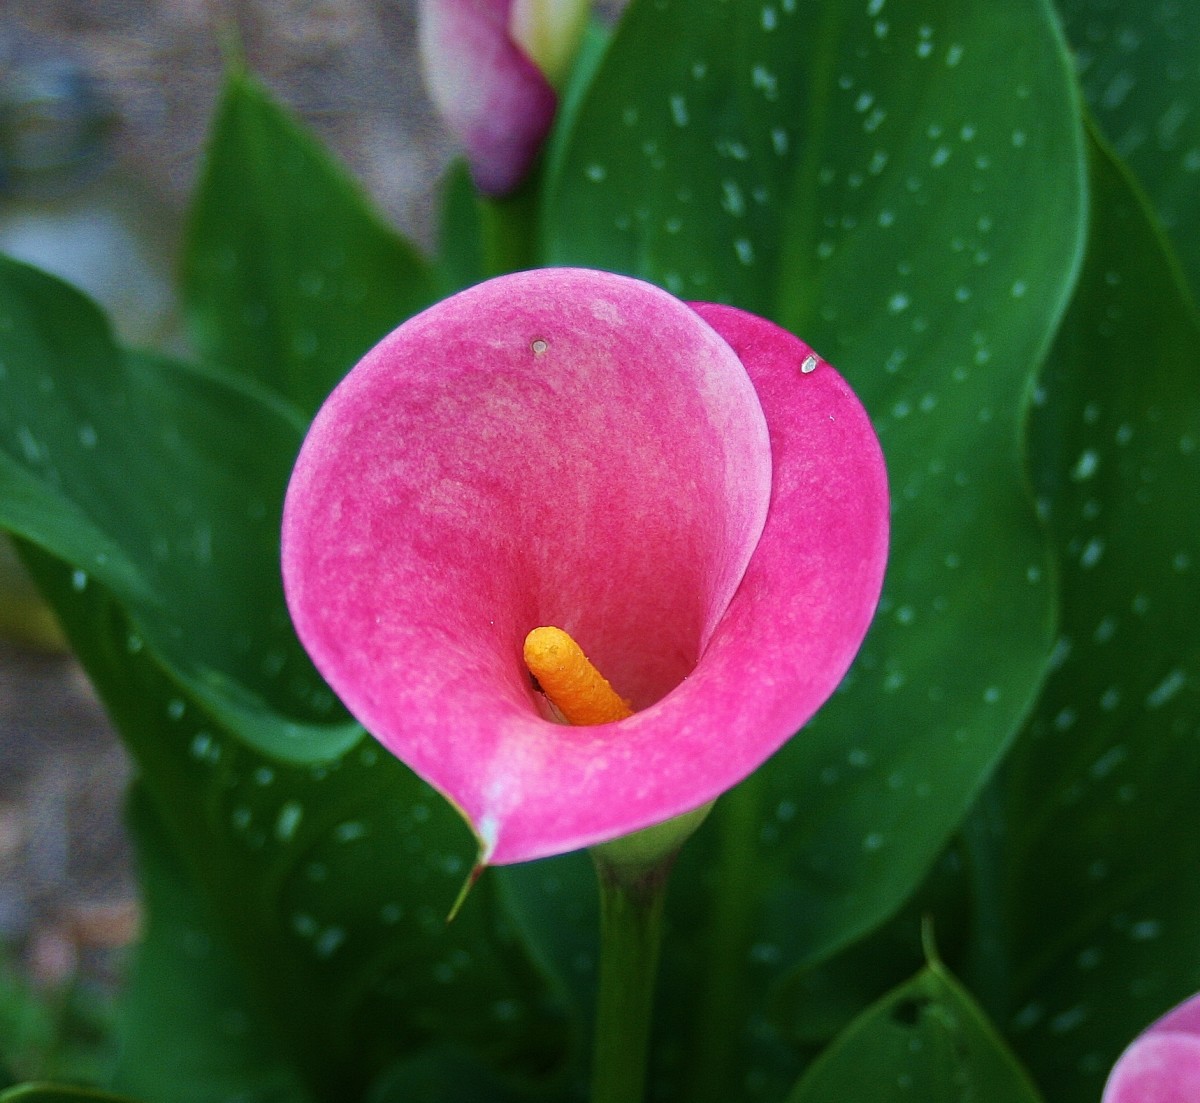 Calla lilies look like they'd be difficult to grow, but they actually aren't finicky at all.